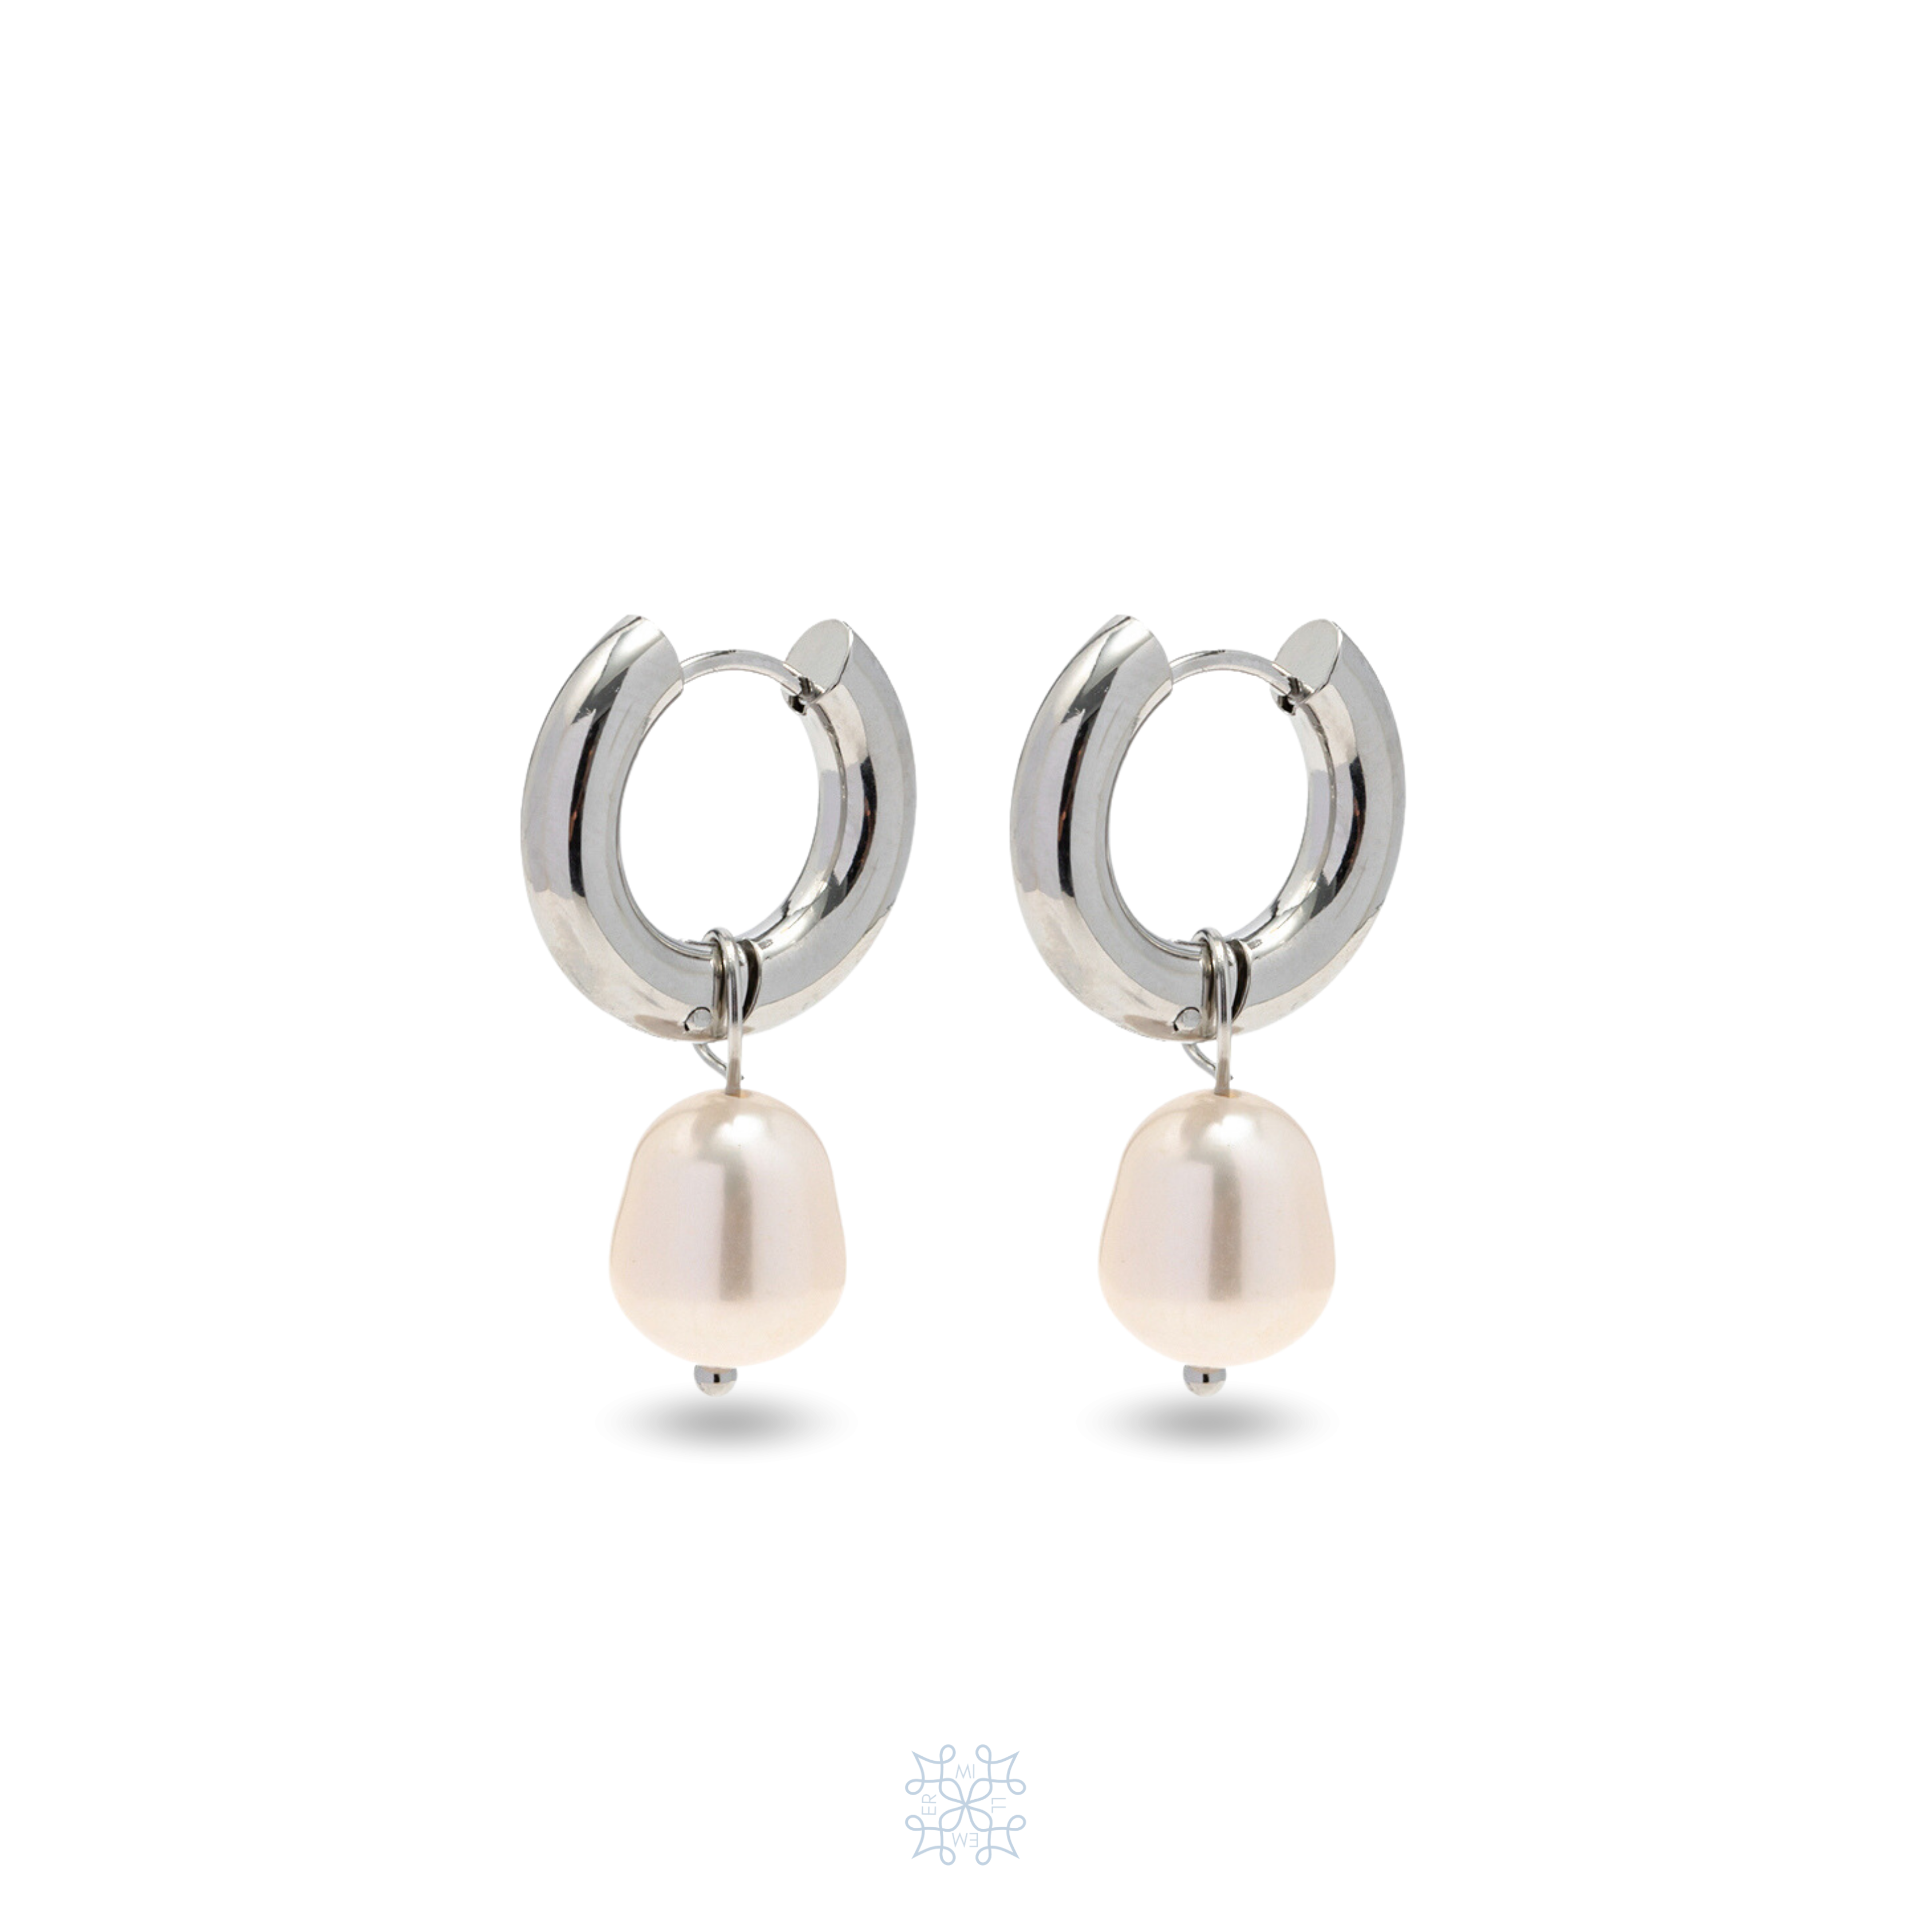 Silver plated hoop earrings with detachable pearl droping. Round shape of hoop with freshwater pearl